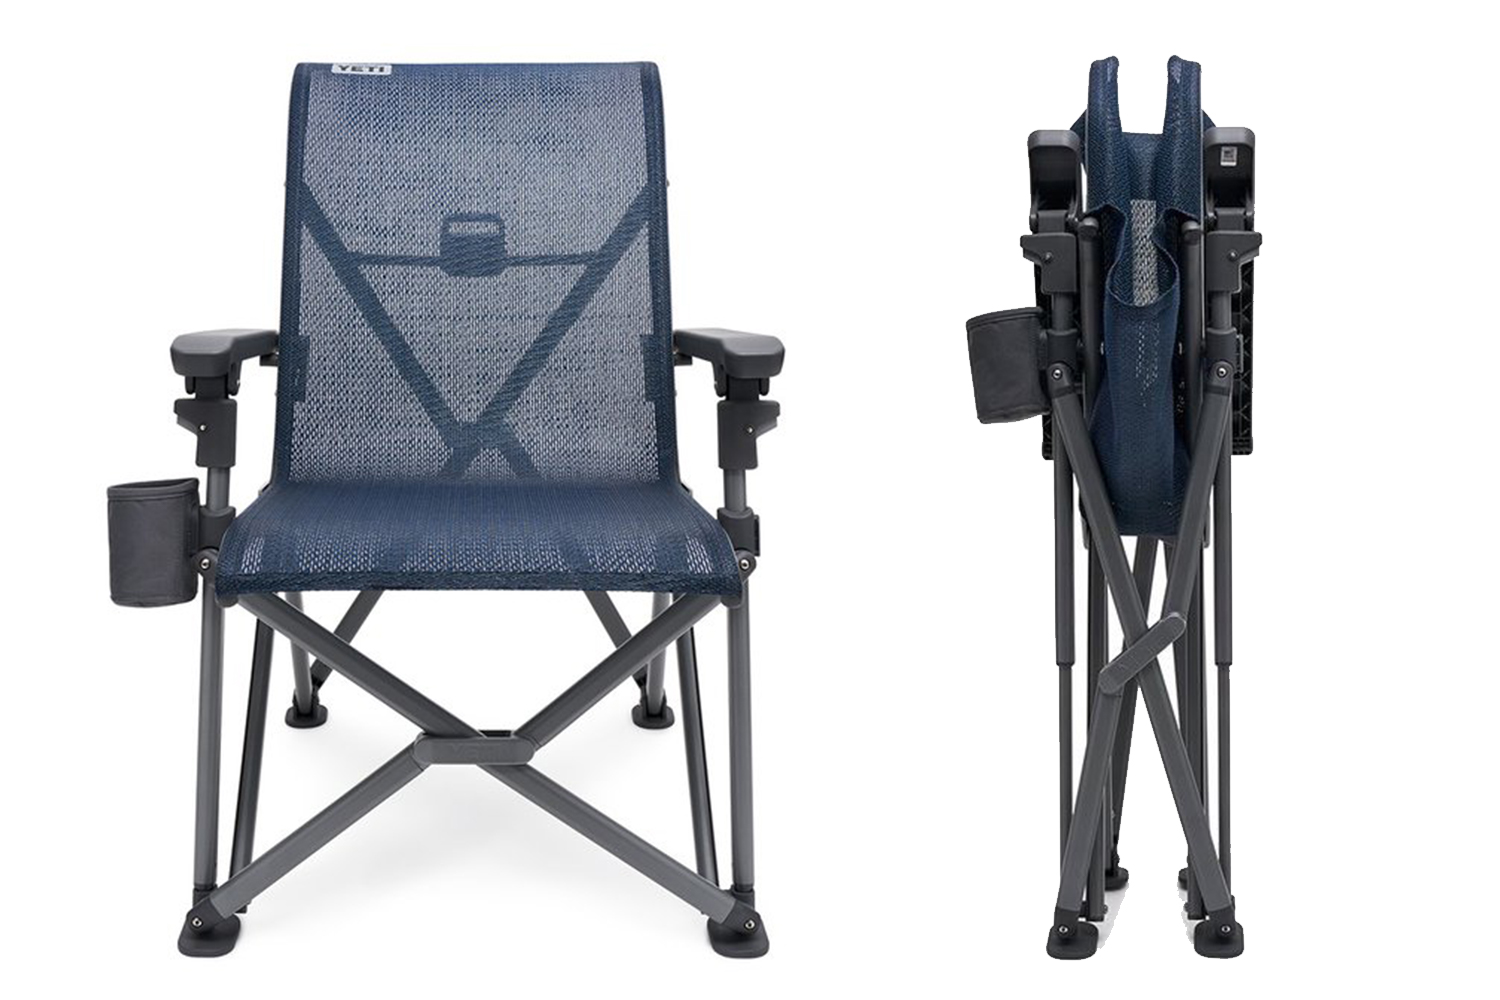 Yeti's New Trailhead Camp Chair Is Lighter, Actually Portable - InsideHook